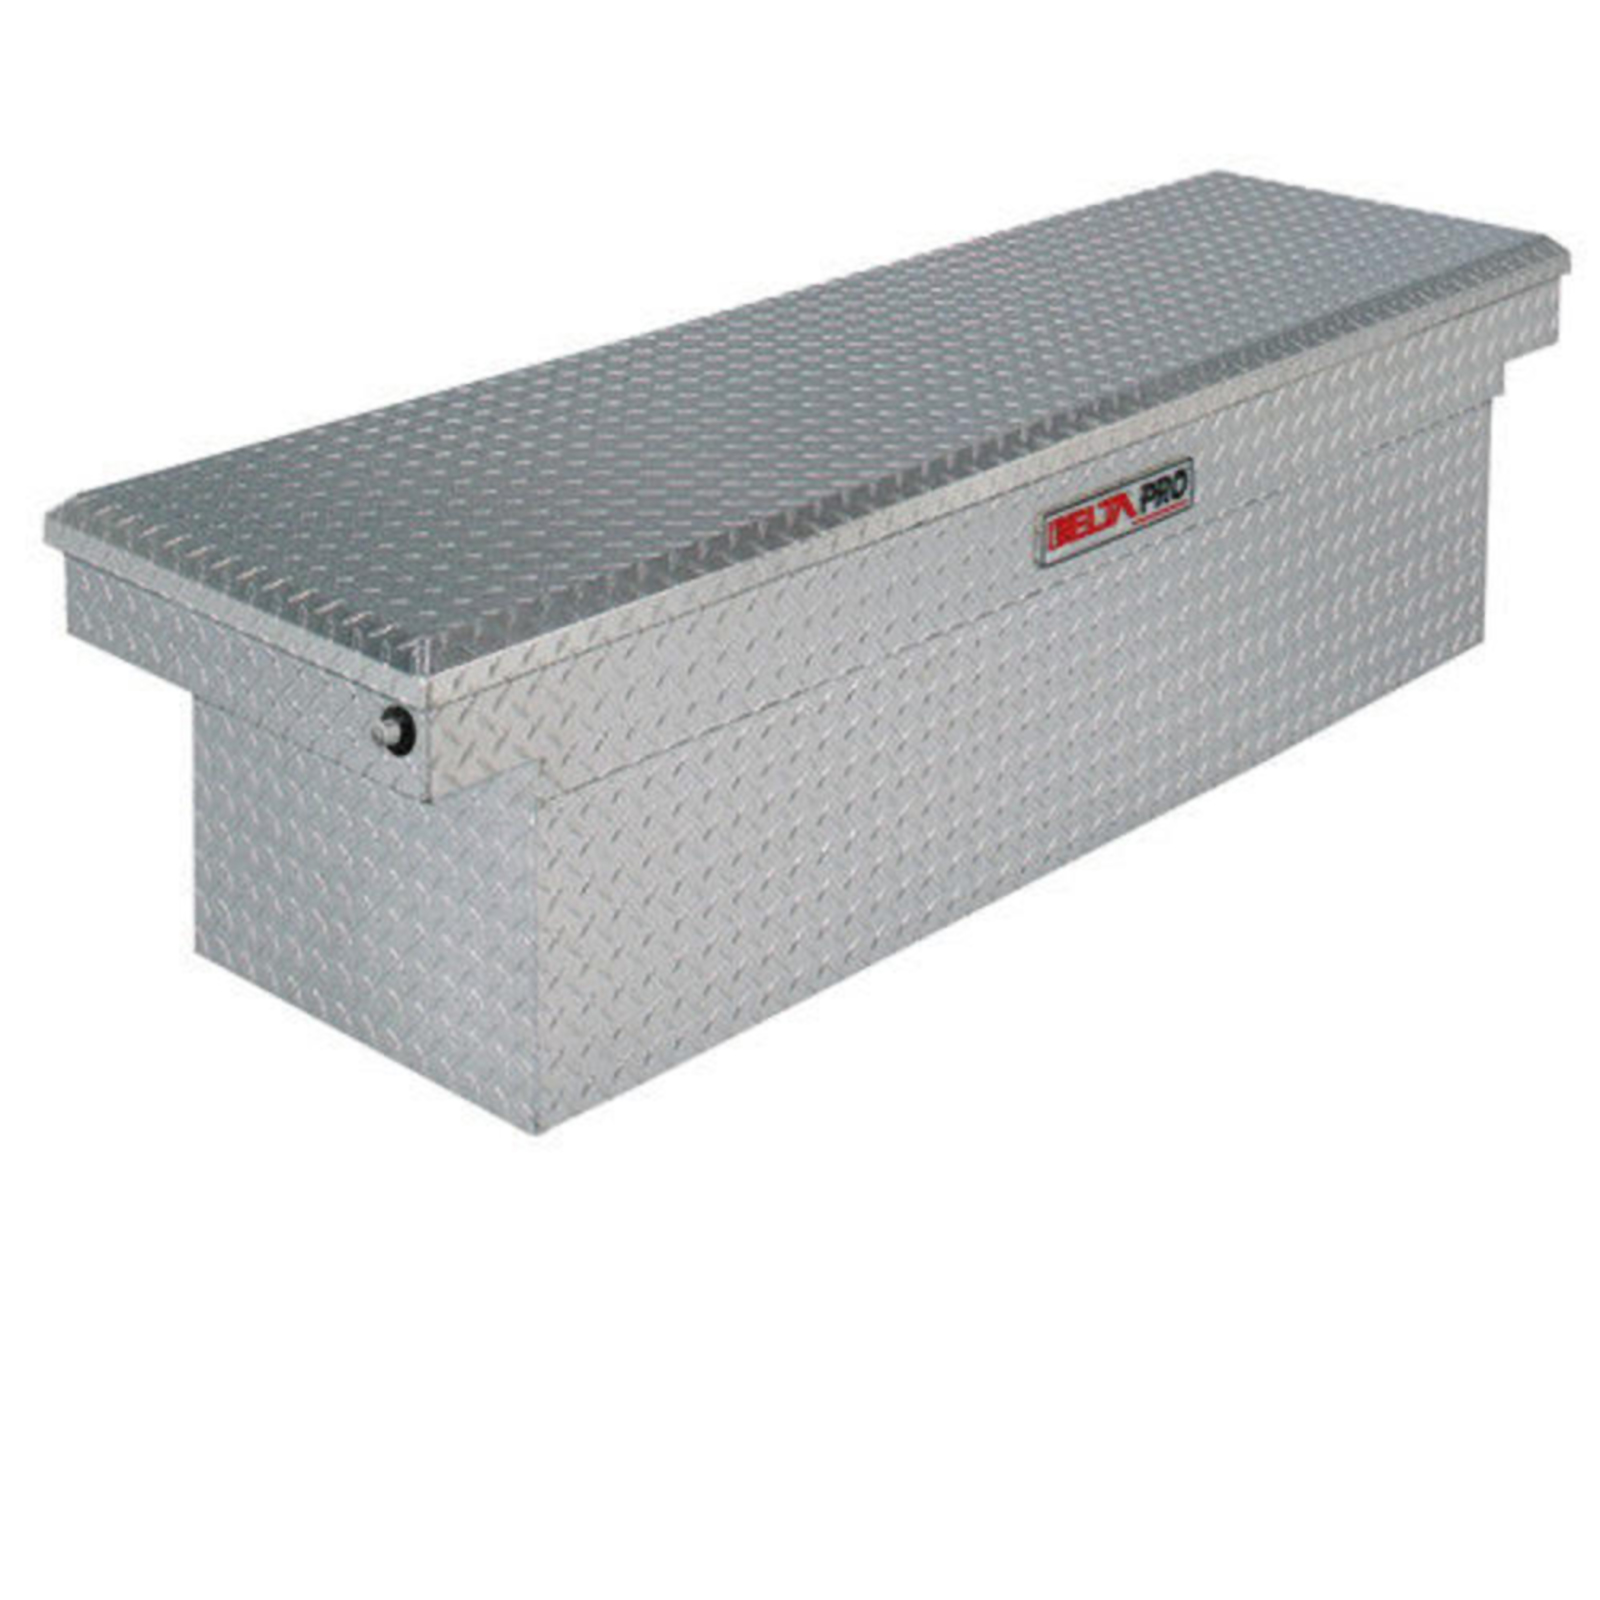 Delta PRO Full-Size Aluminum Crossover Truck Box with Single Lid